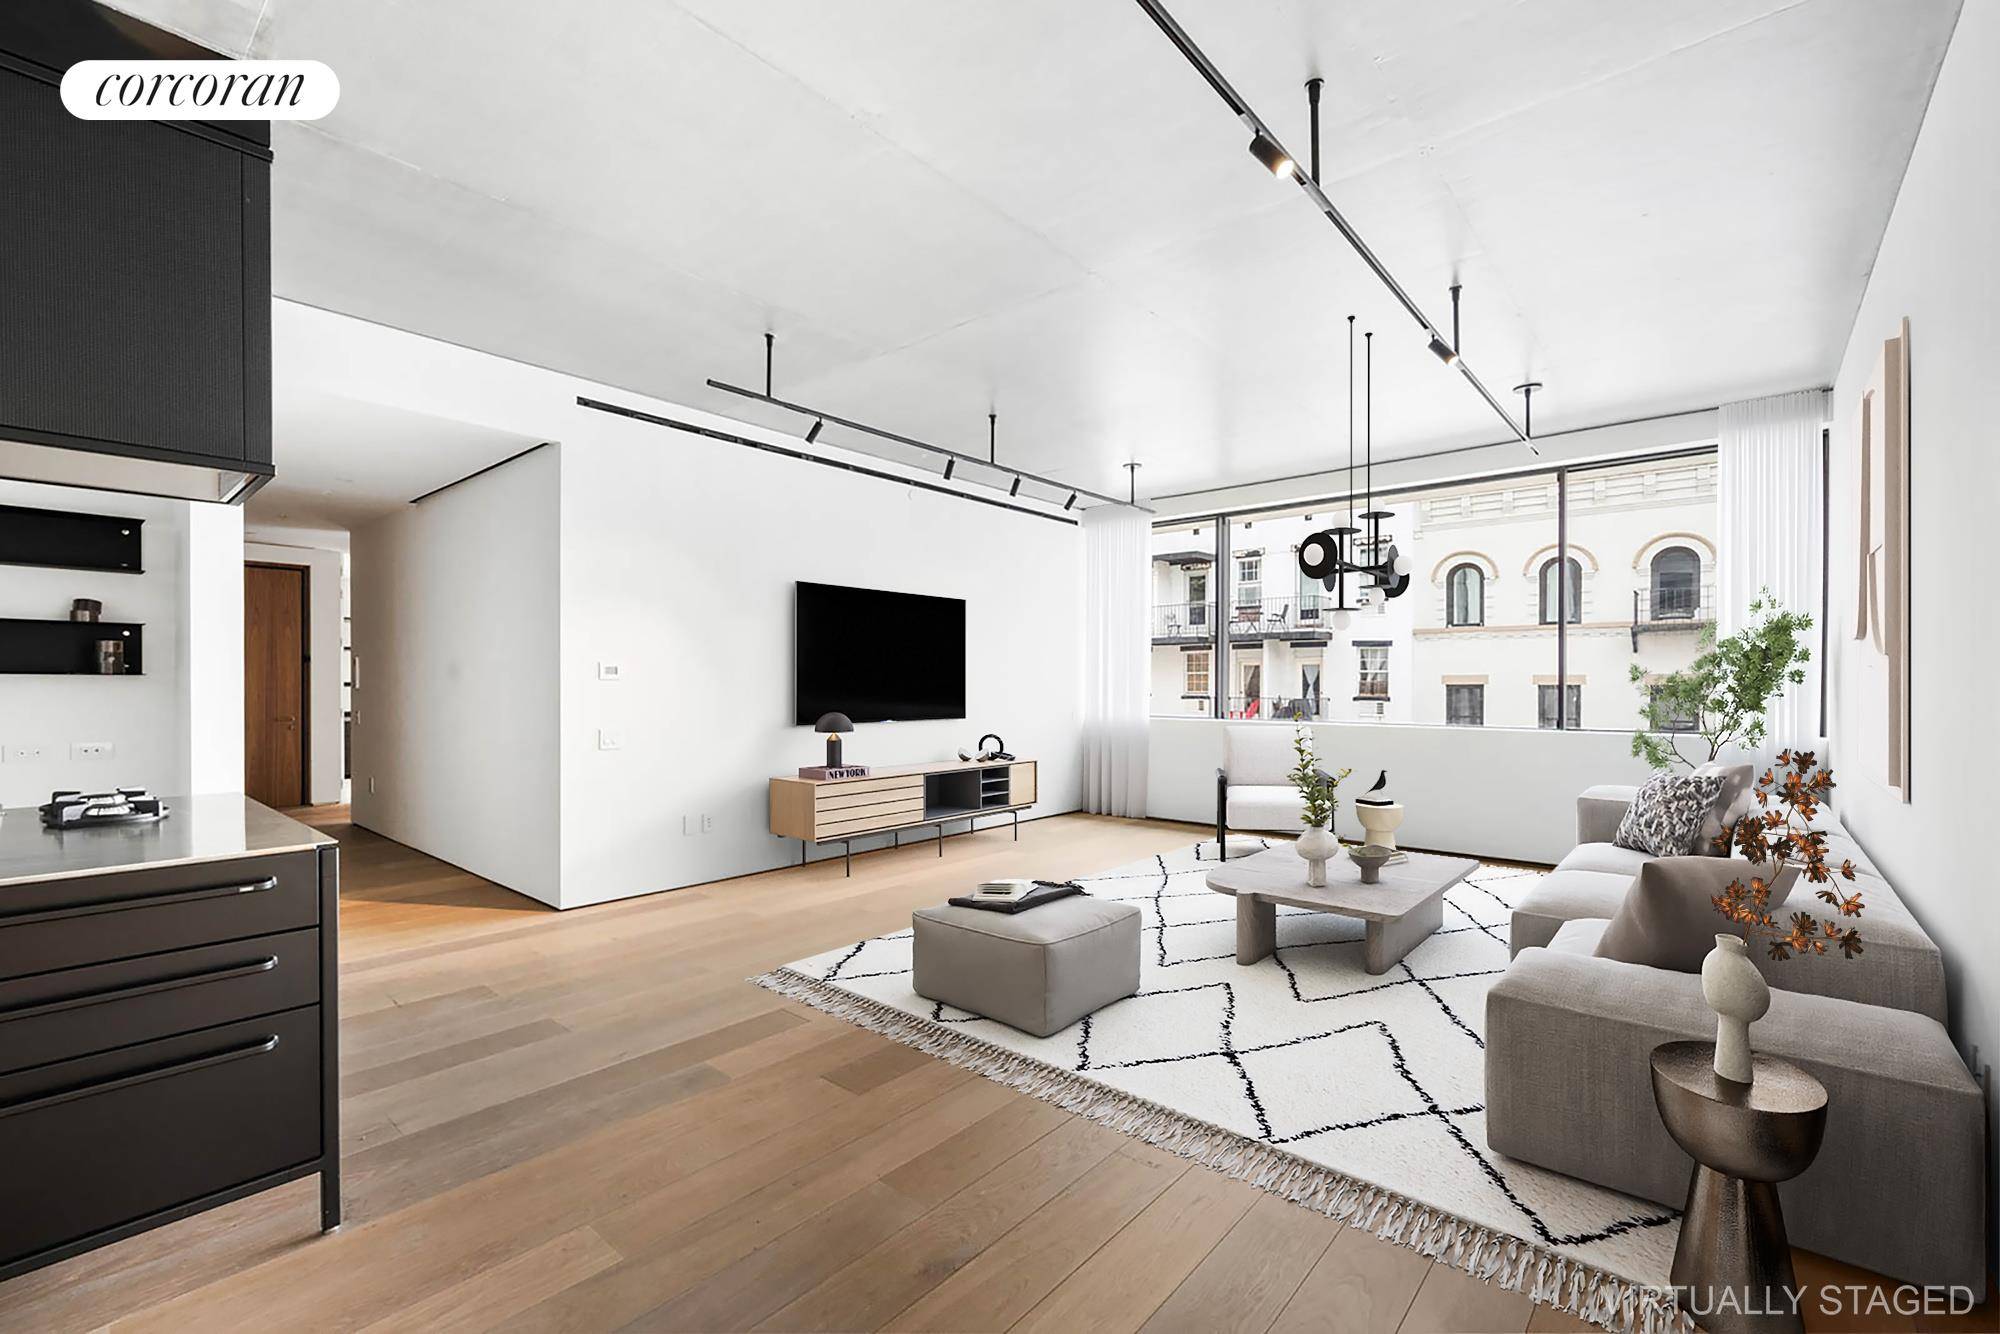 Located on the most prime West Chelsea block, live in the most bespoke 1303sqft, 2 bed, 2 bath boutique 24 hr doorman condo.